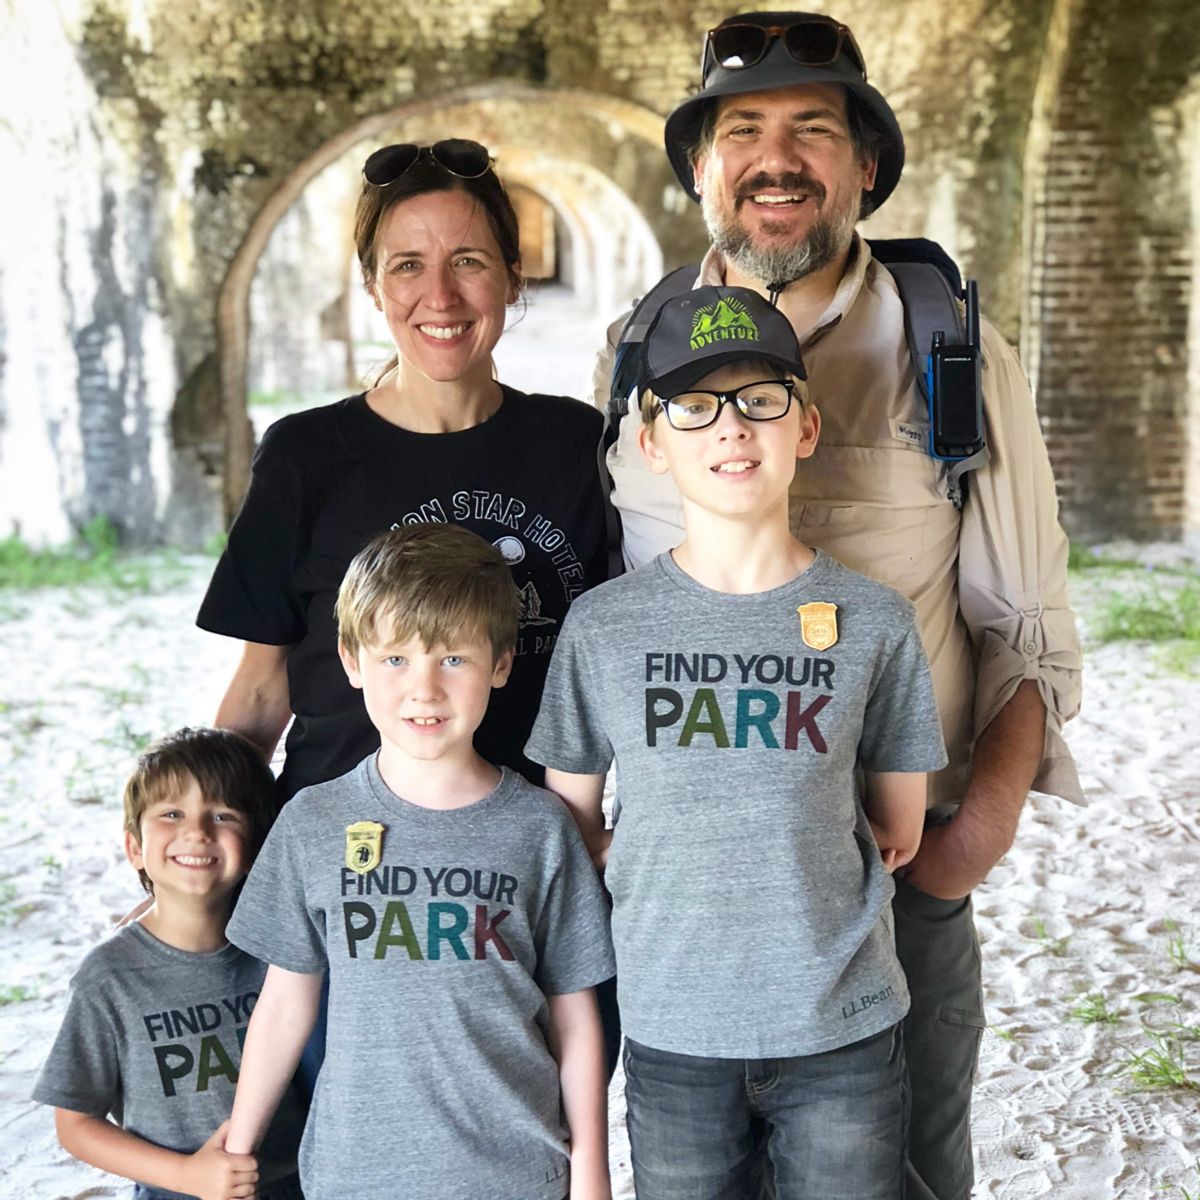 Jason, Abby, Jack, Ethan and Henry at Fort Pickens part of the Gulf Islands National Seashore